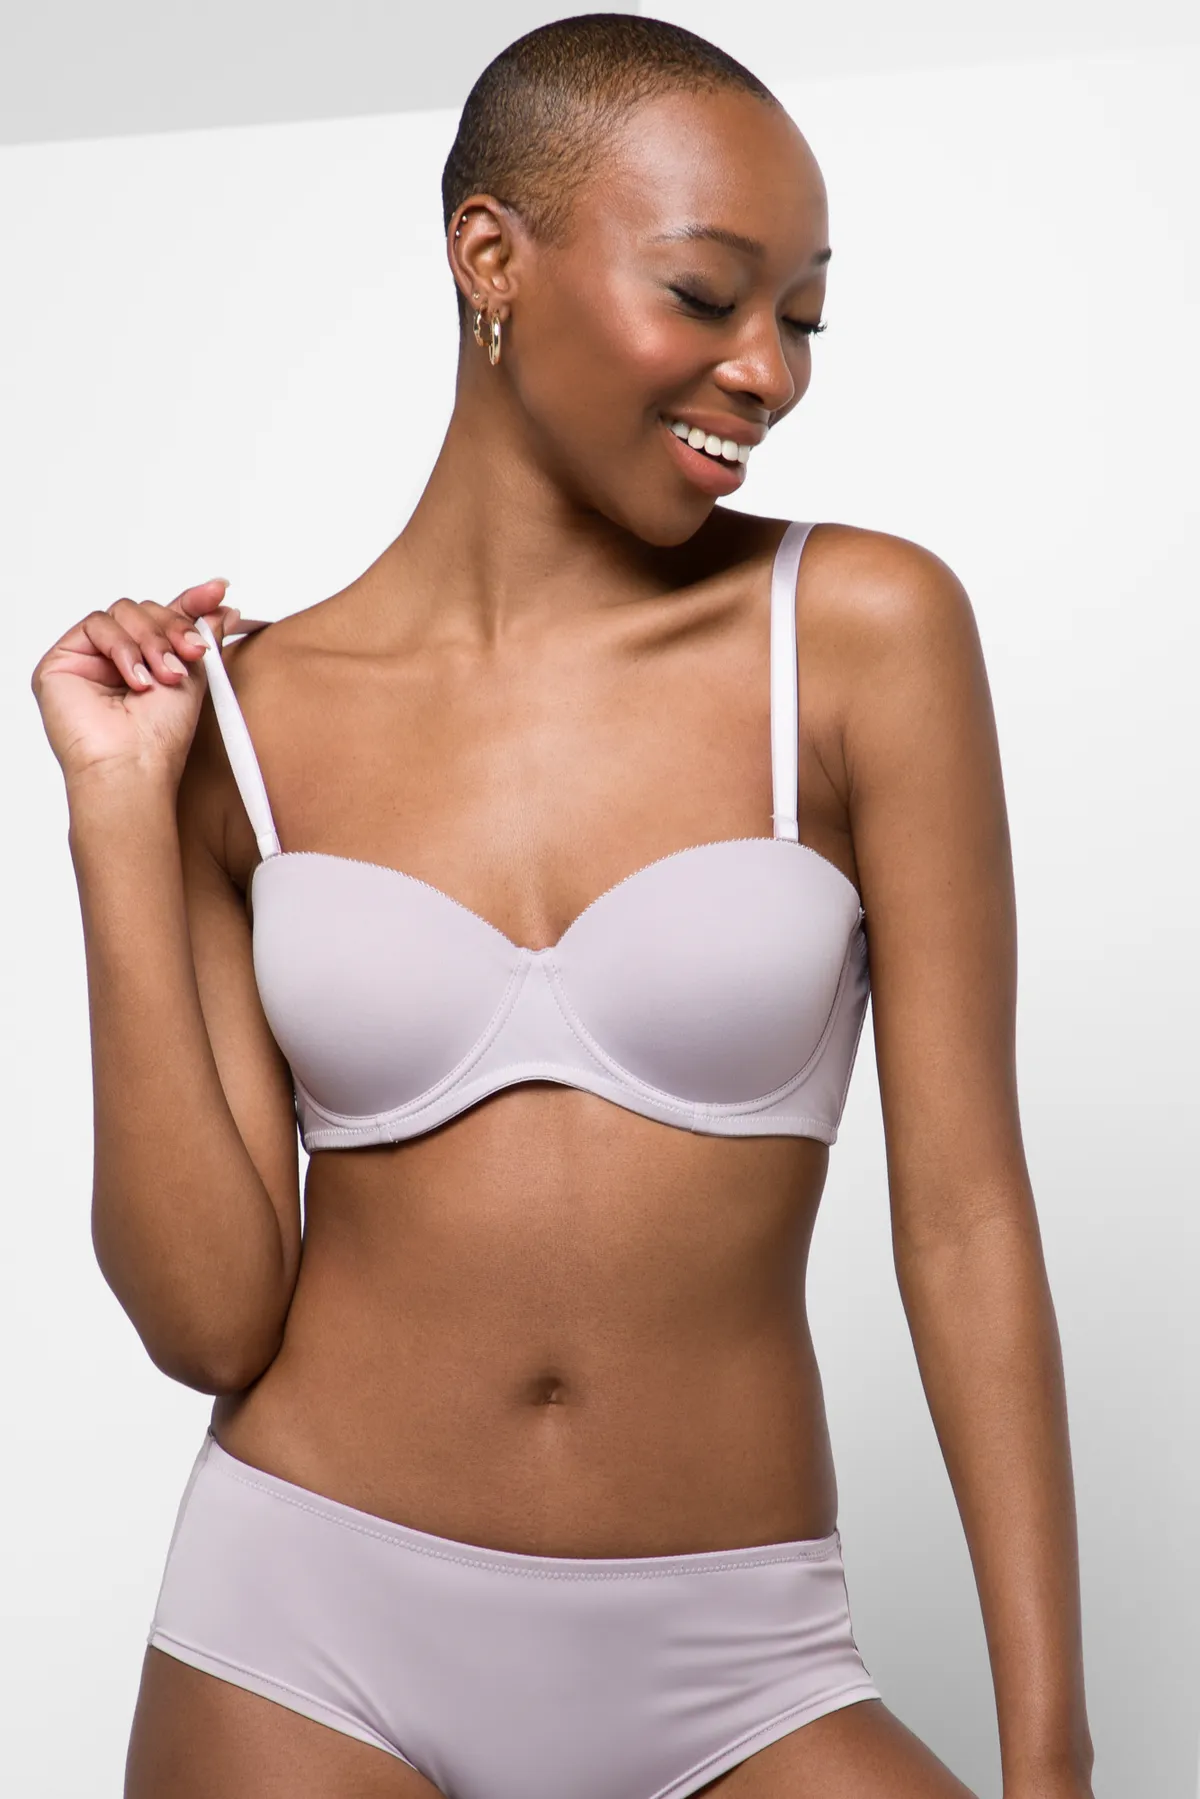 Ackermans - Save 30.00 on all 2-pack Perfect Fit Bras, from only